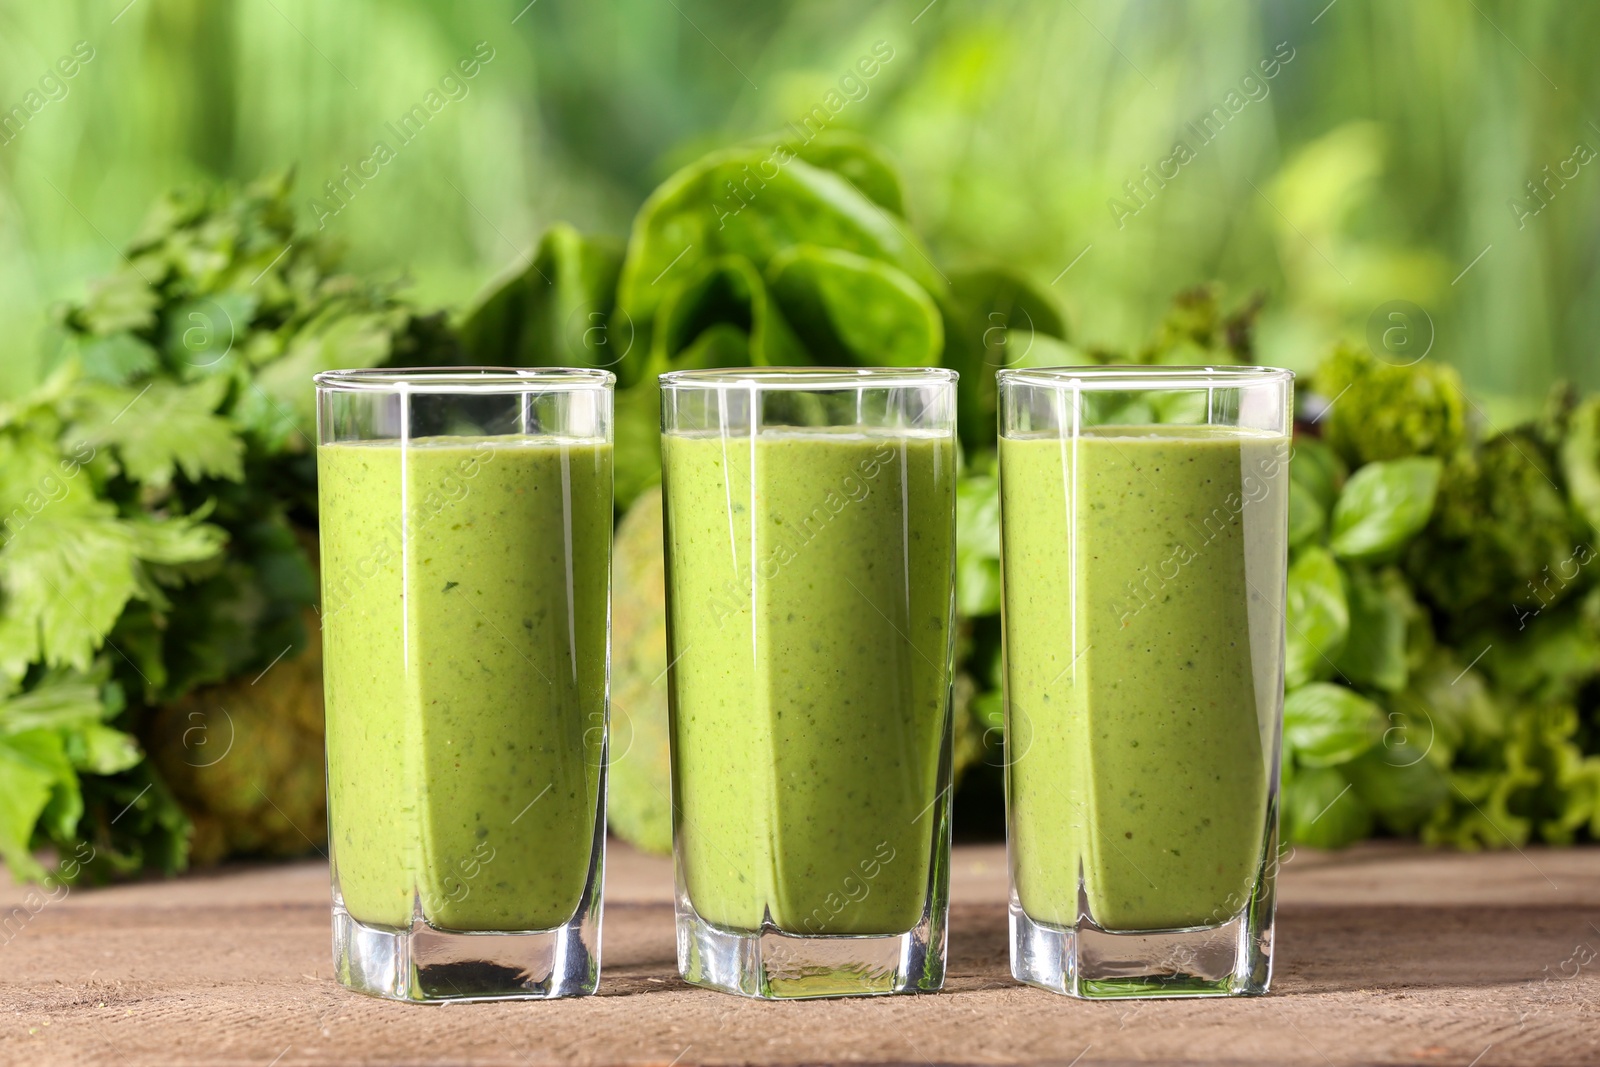 Photo of Glasses of fresh green smoothie and ingredients on wooden table